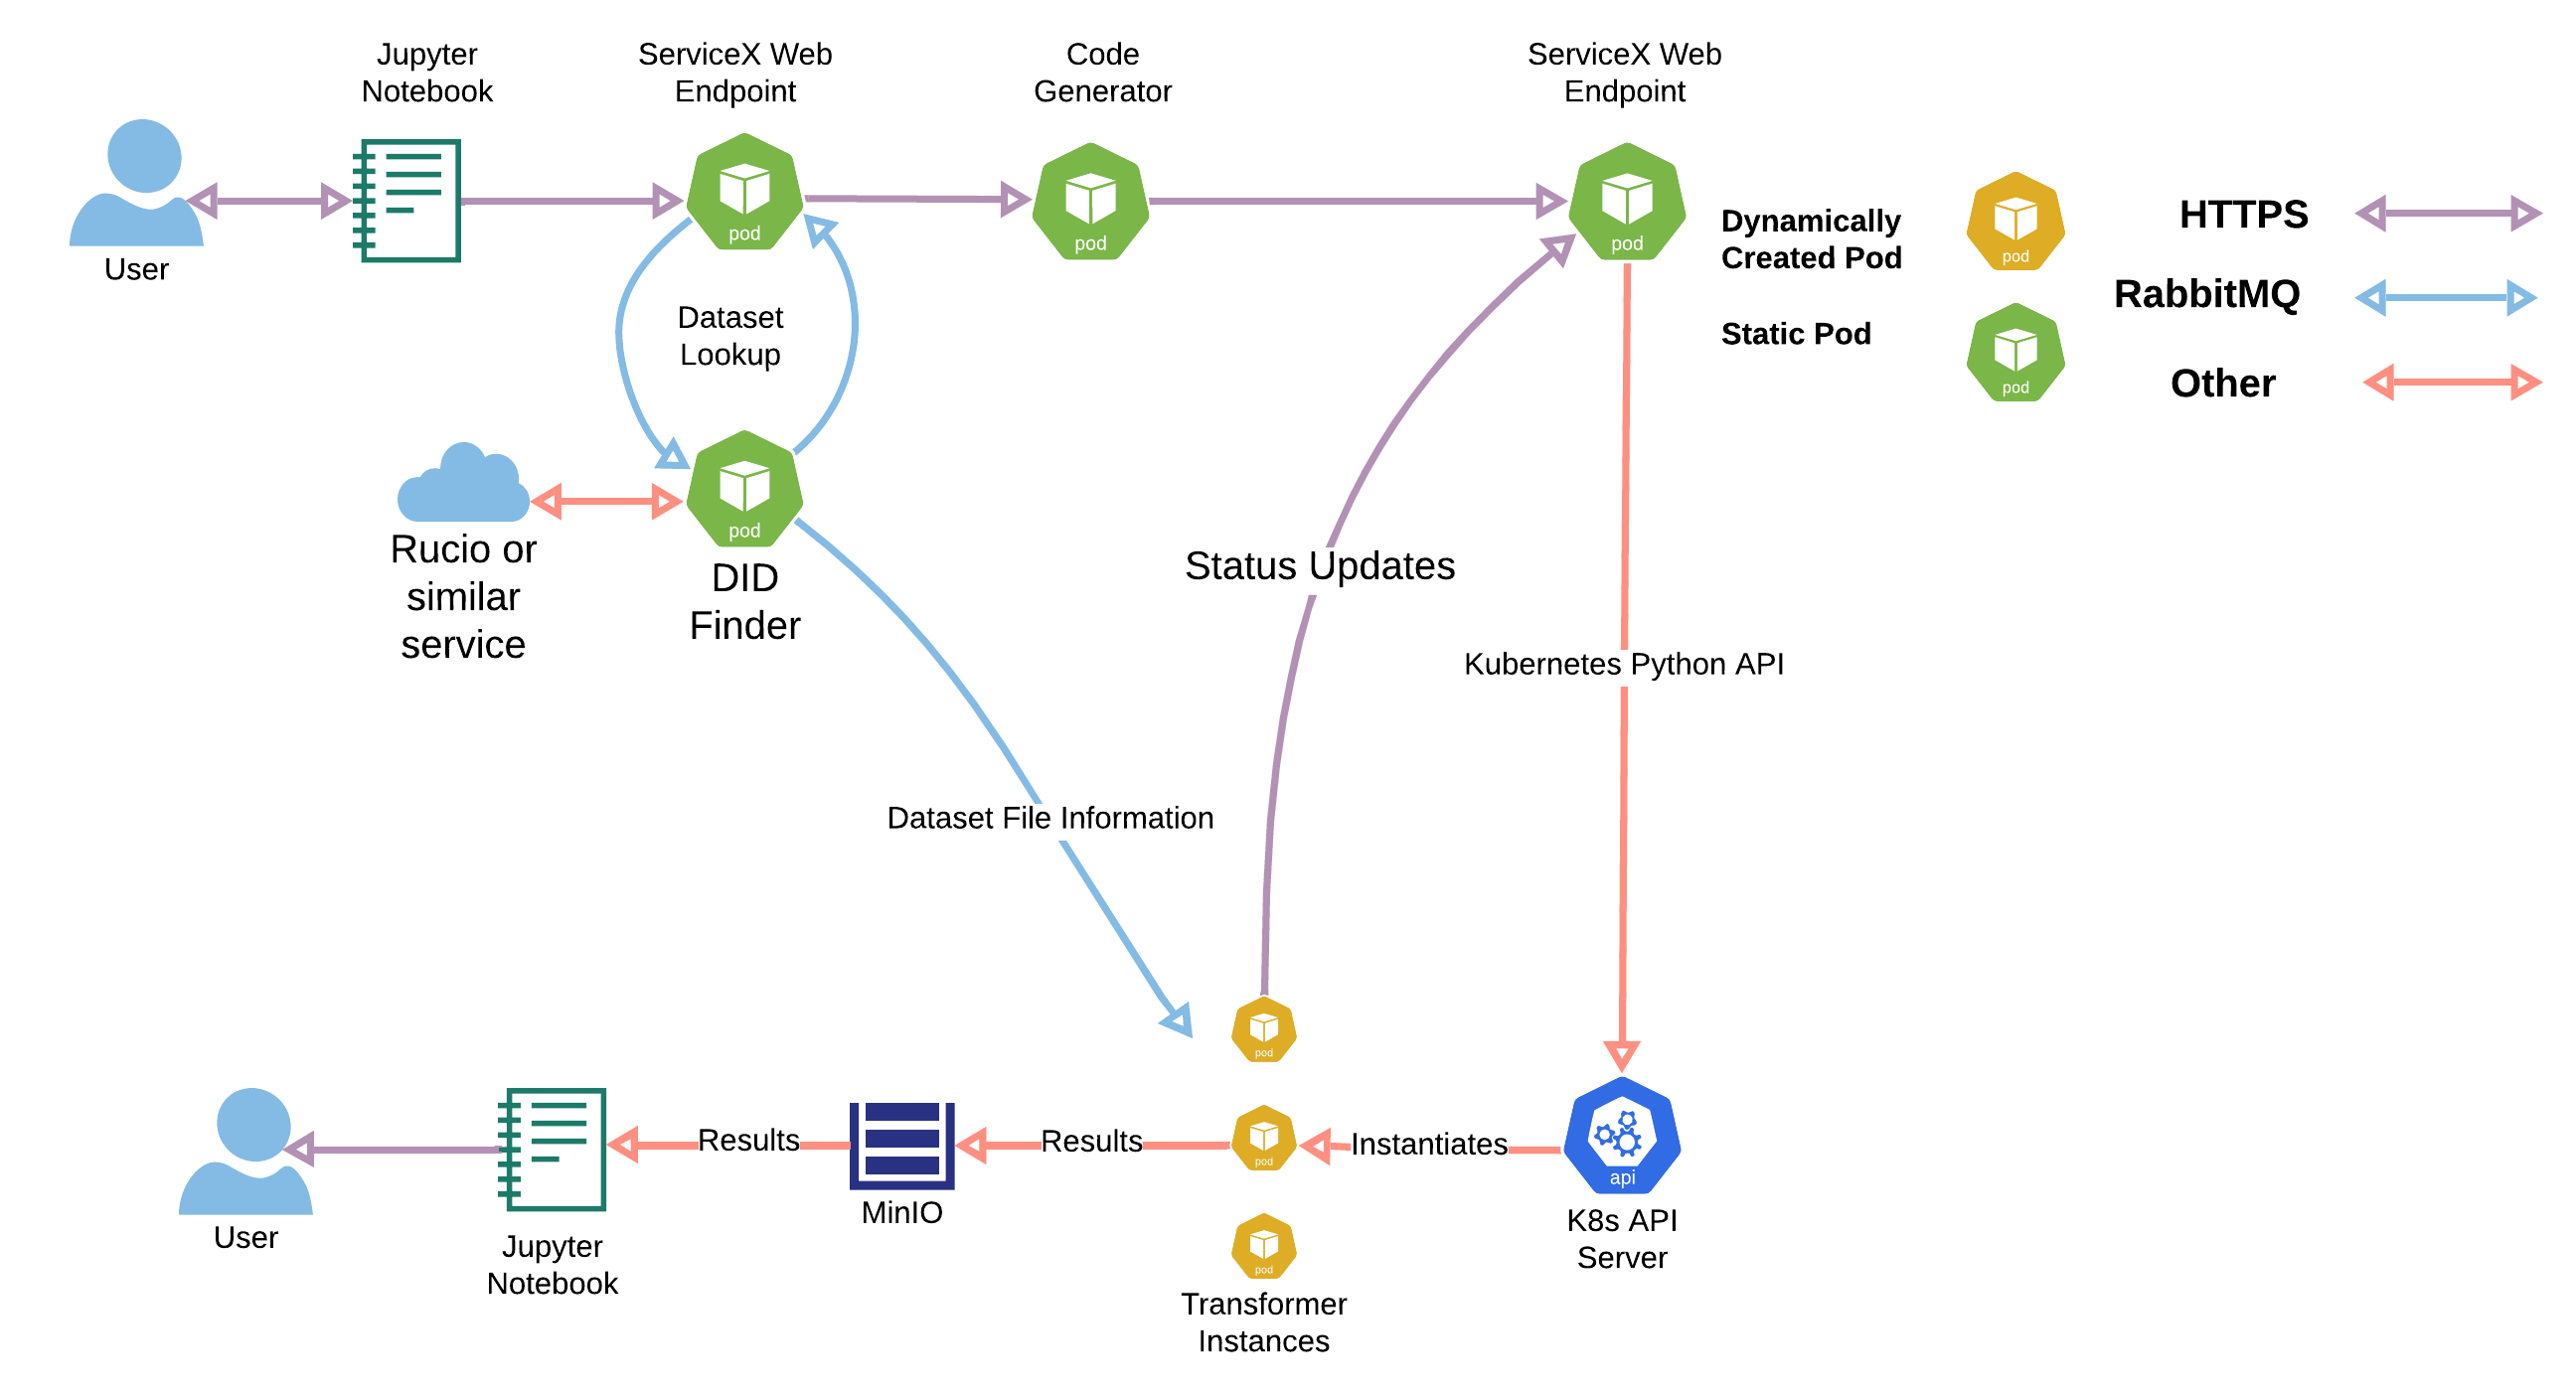 Request Lifecycle